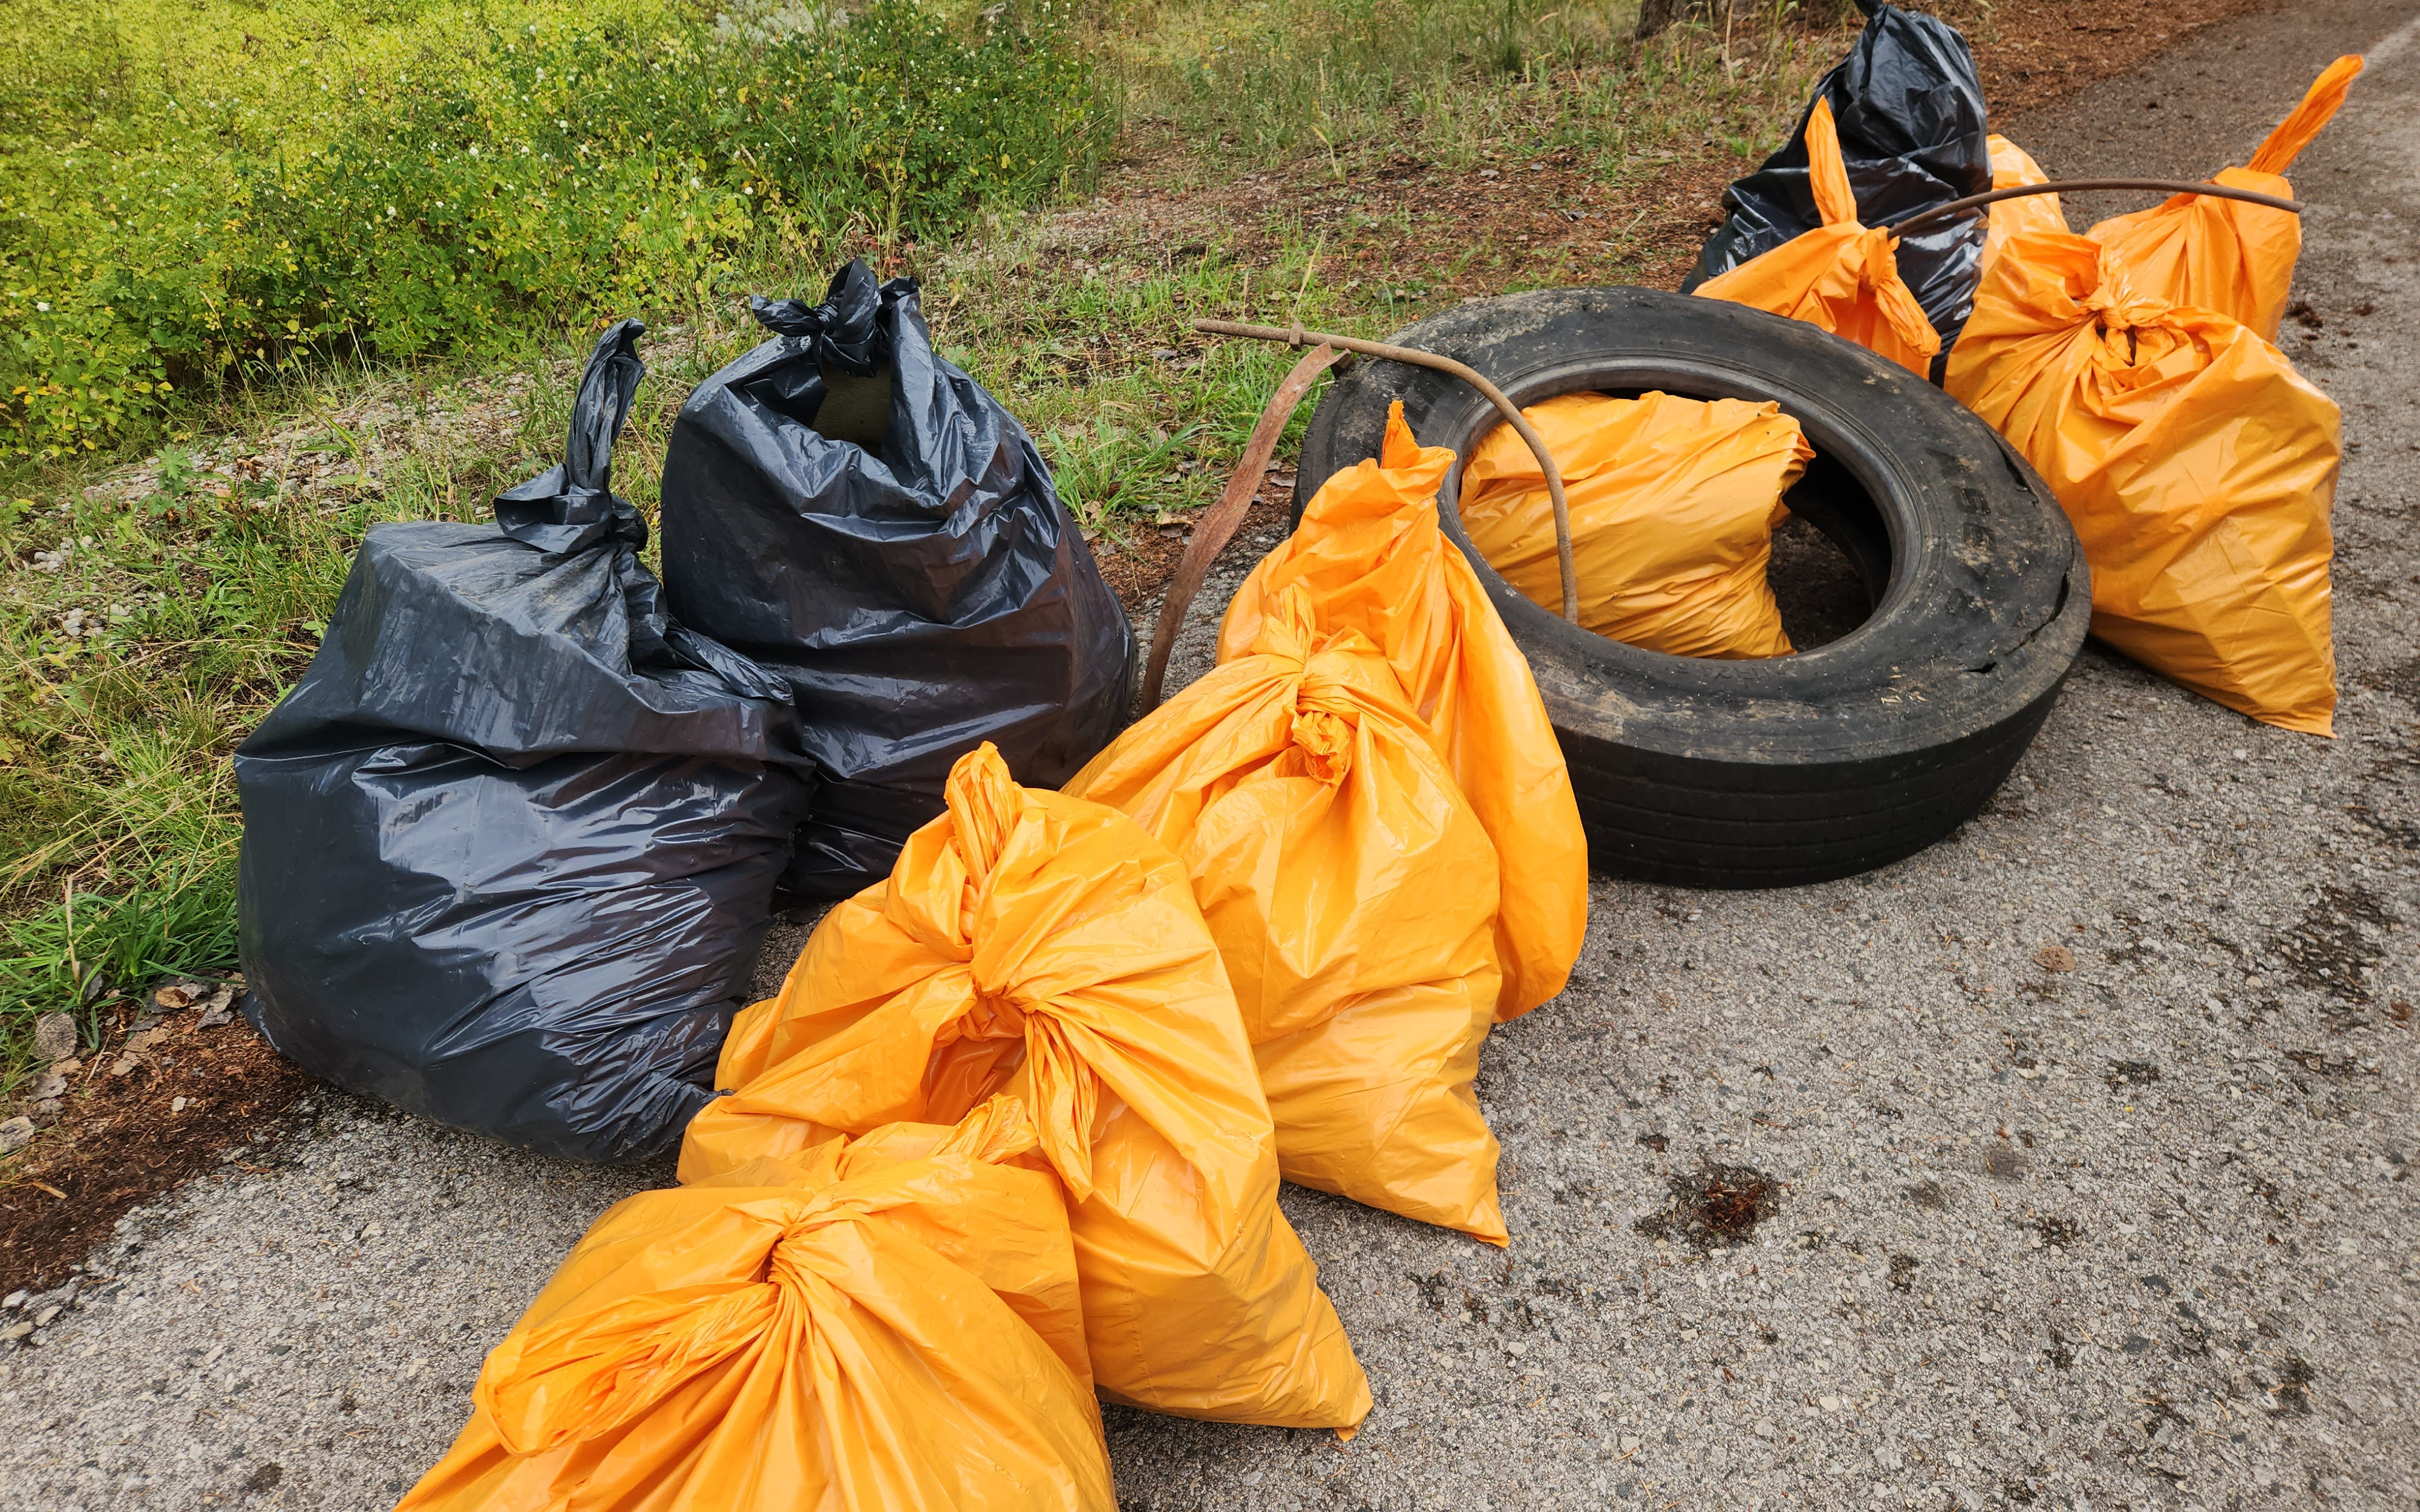 Full trash bags gathered together along with larger pieces of metal and an old tire